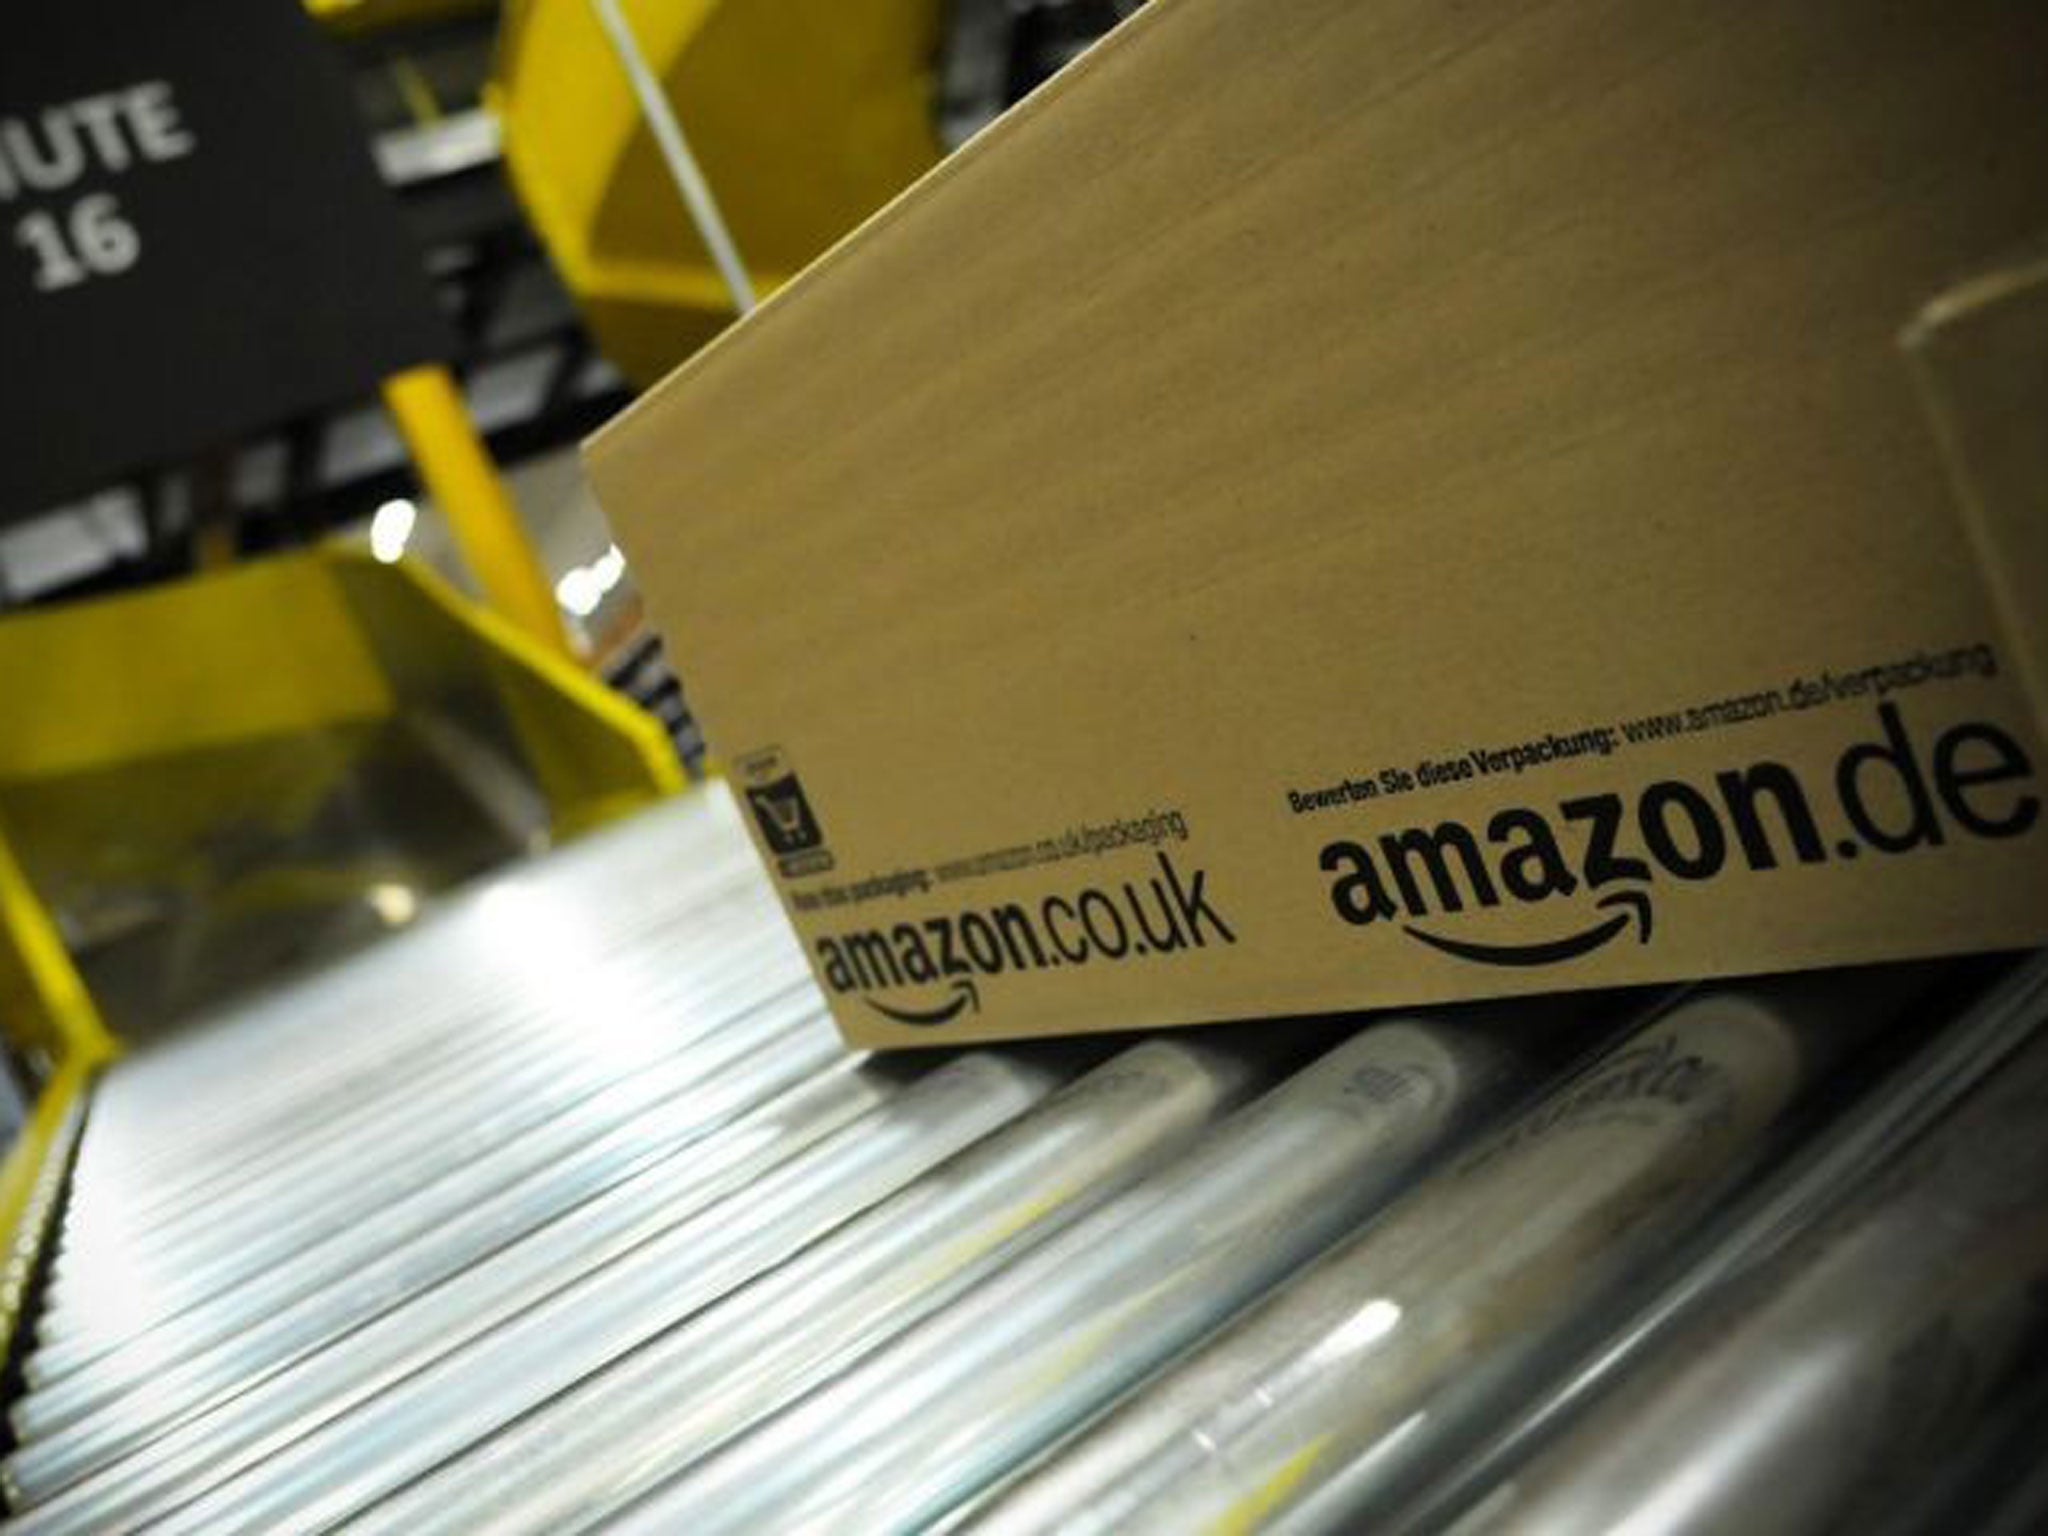 Amazon, the online sales business, has spawned a whole new genre of anti-consumerist satire